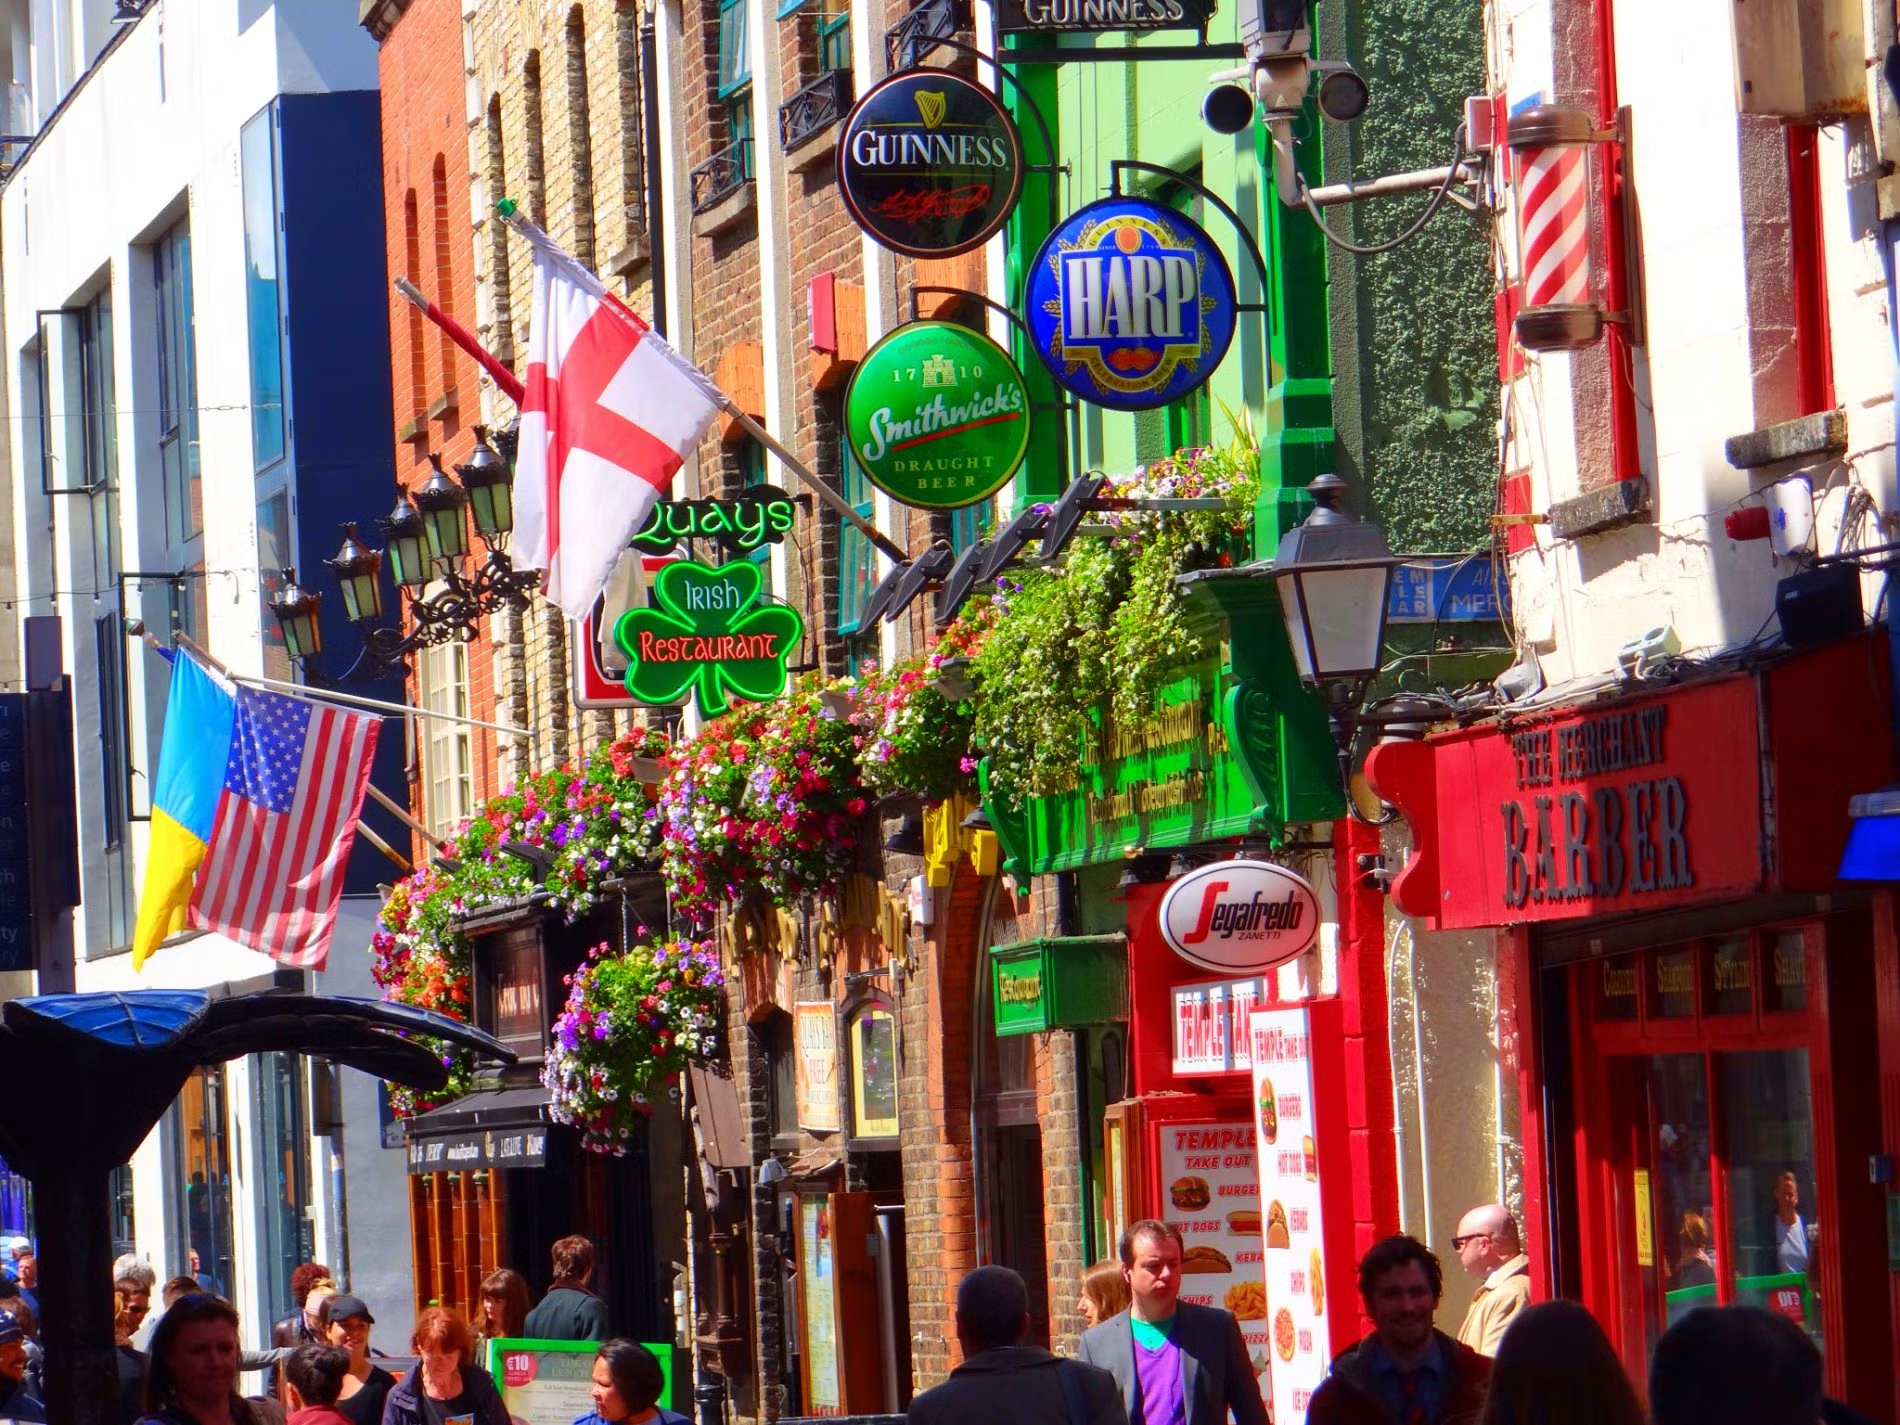 A colorful row of pubs in Ireland